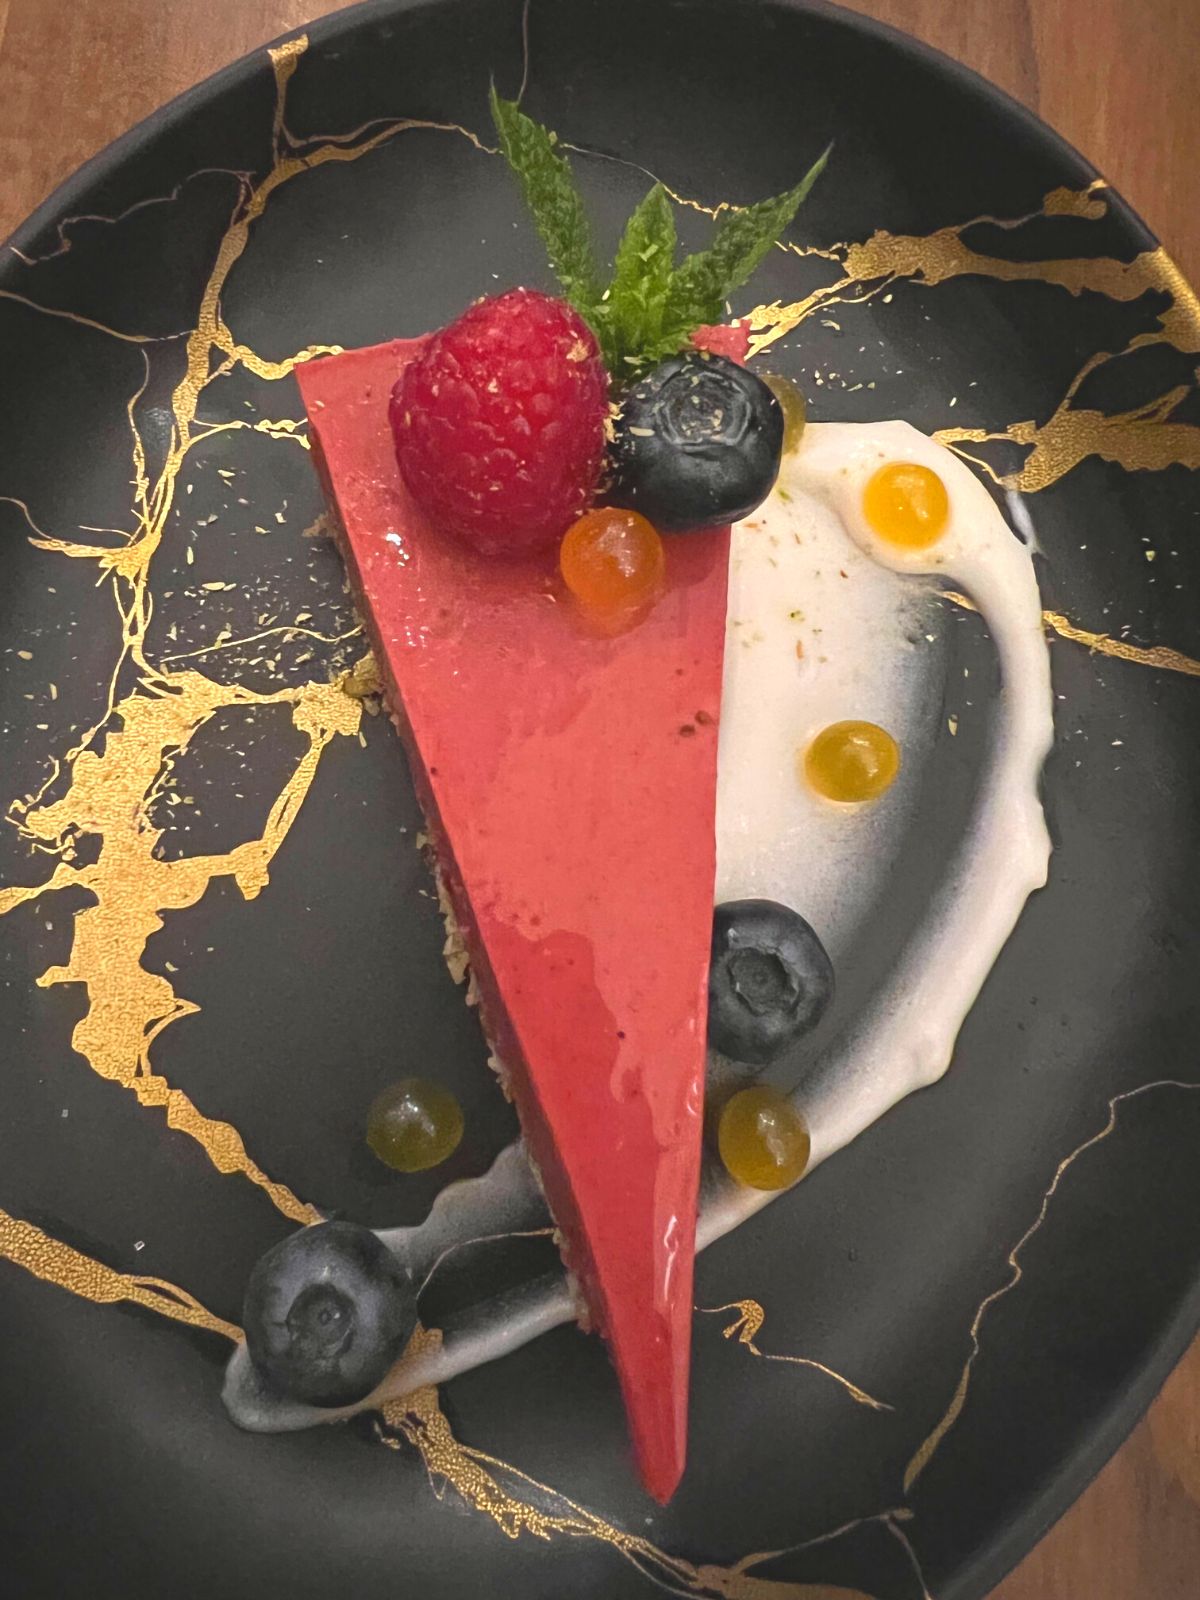 Slice of Raspberry tart with berries on black and gold plate.